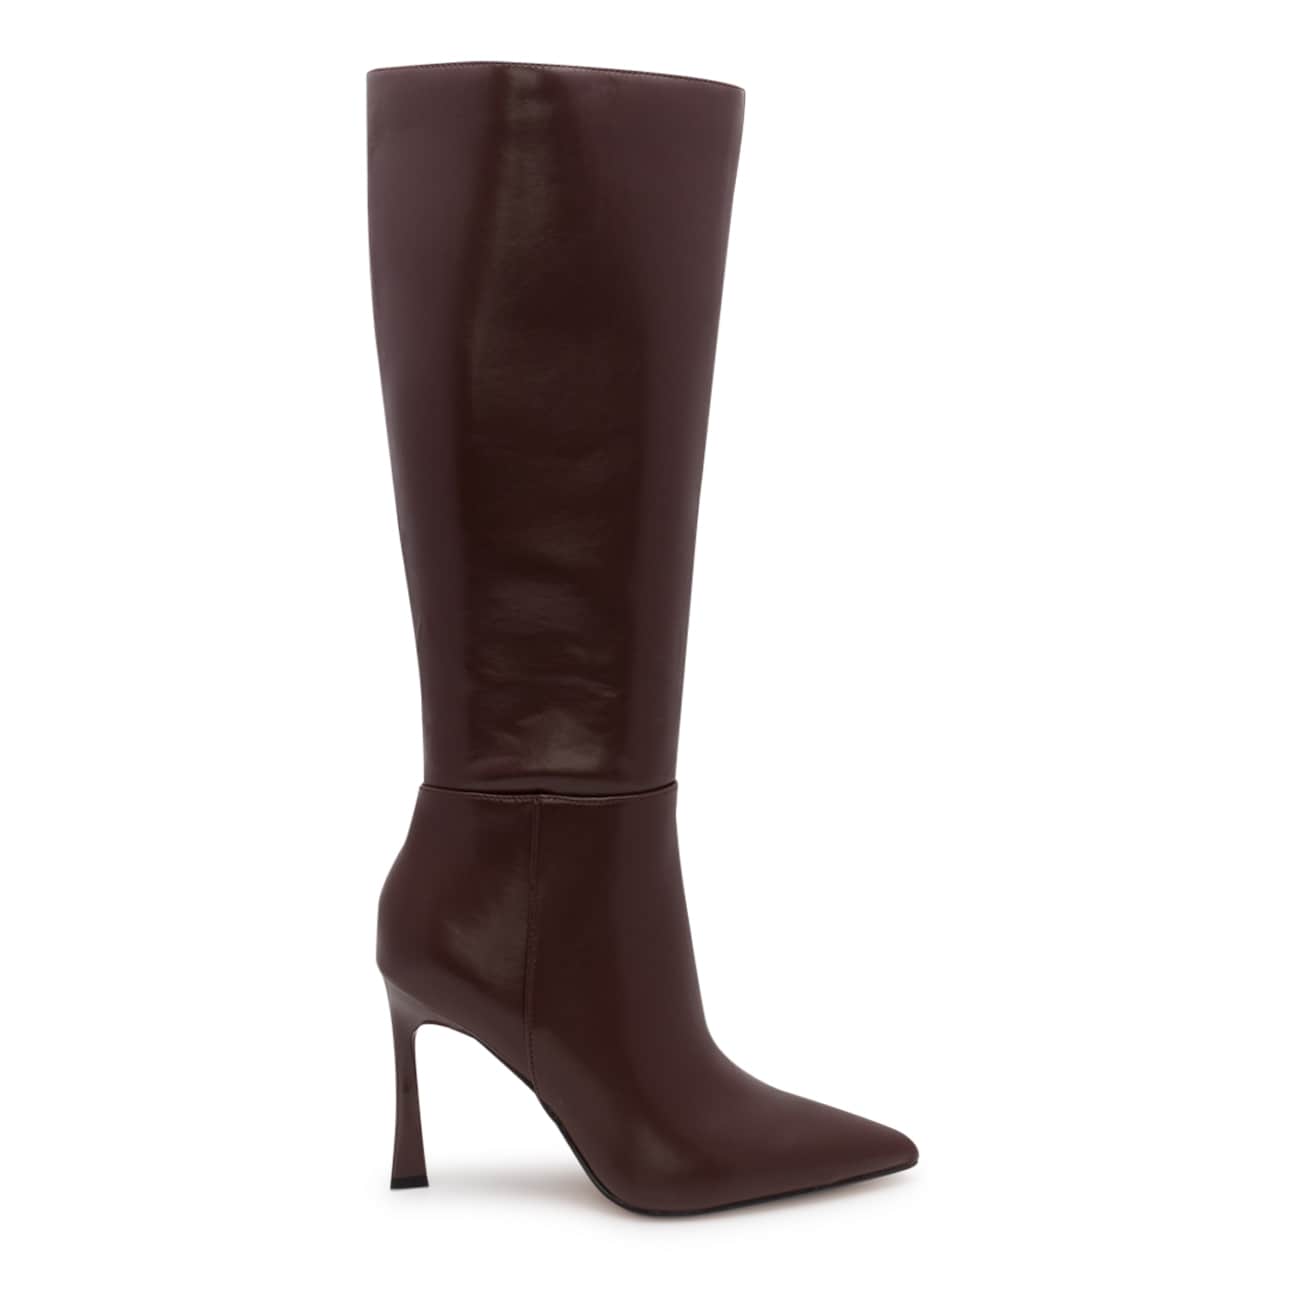 Mix No.6 Maryanne Tall Dress Boot | The Shoe Company